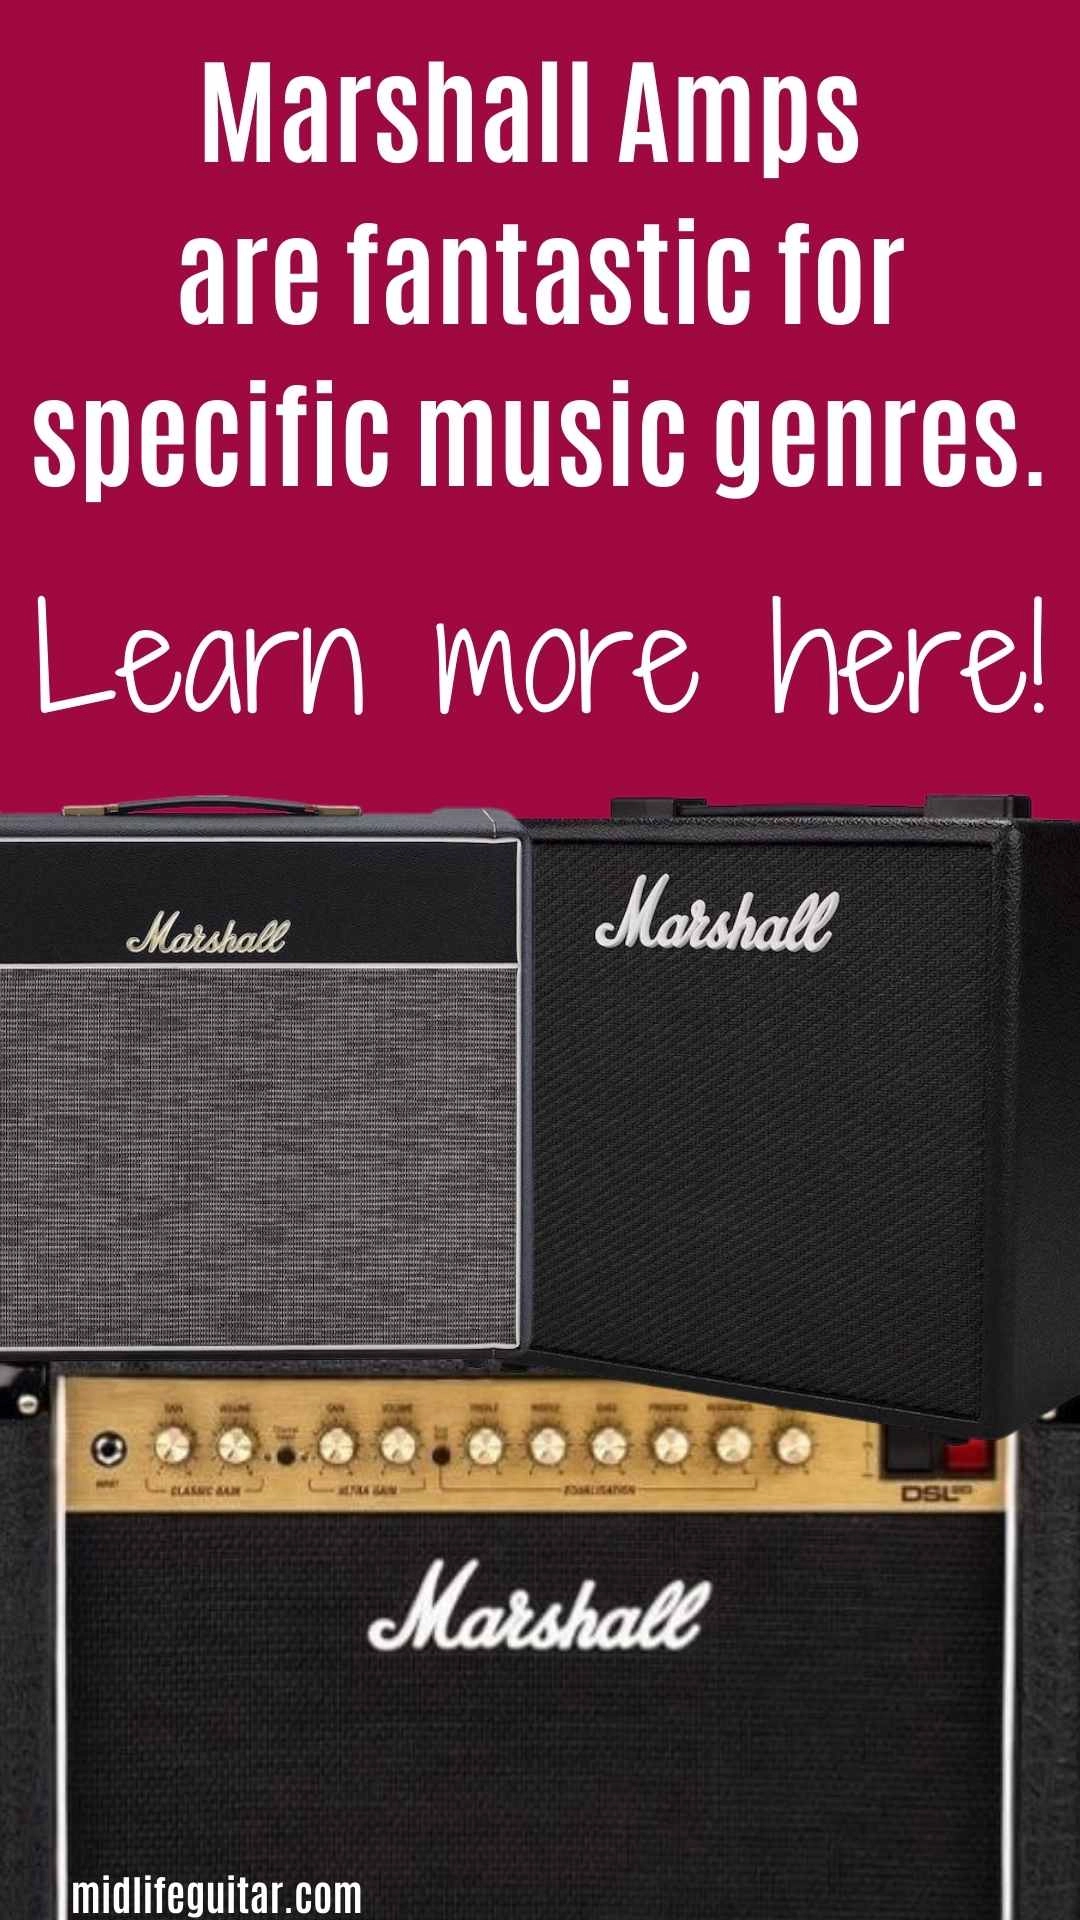 Three Marshall amps, (code 25, DSL20C, and Origin 20C), stack together with the words "Marshall Amps are fantastic for specific genres.Learn more here!"